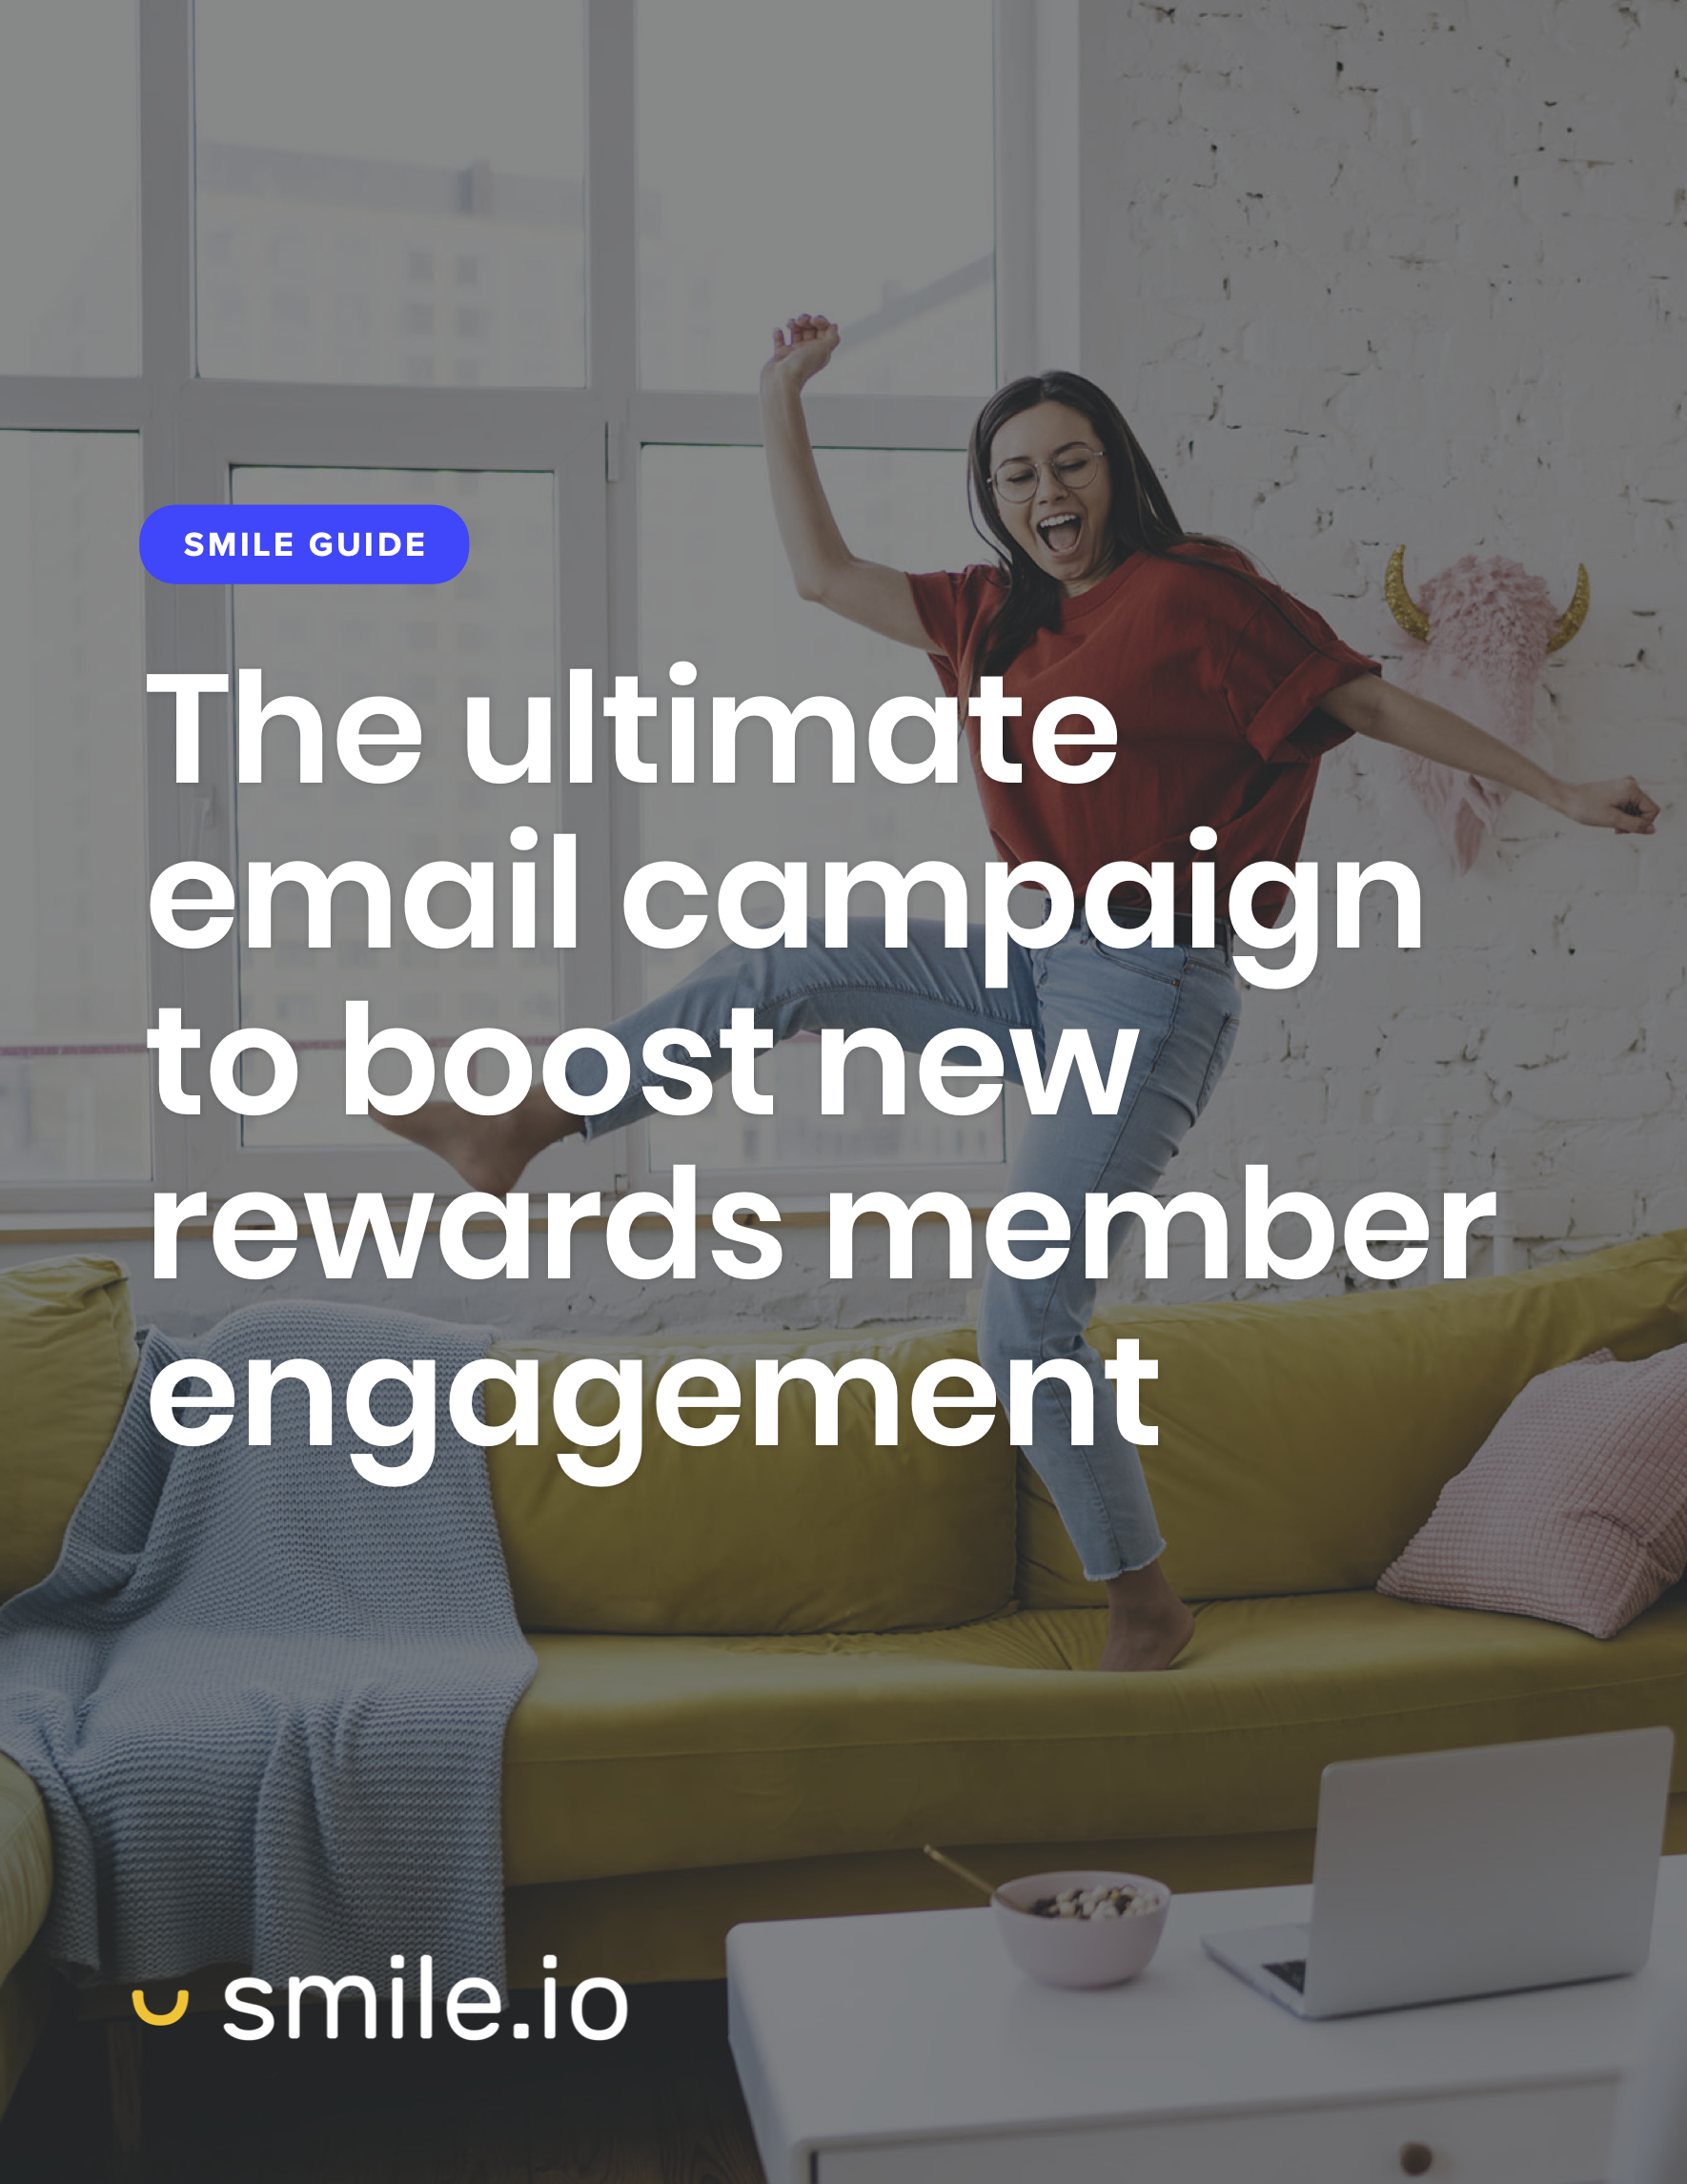 The Ultimate Email Campaign to Boost New Rewards Member Engagement